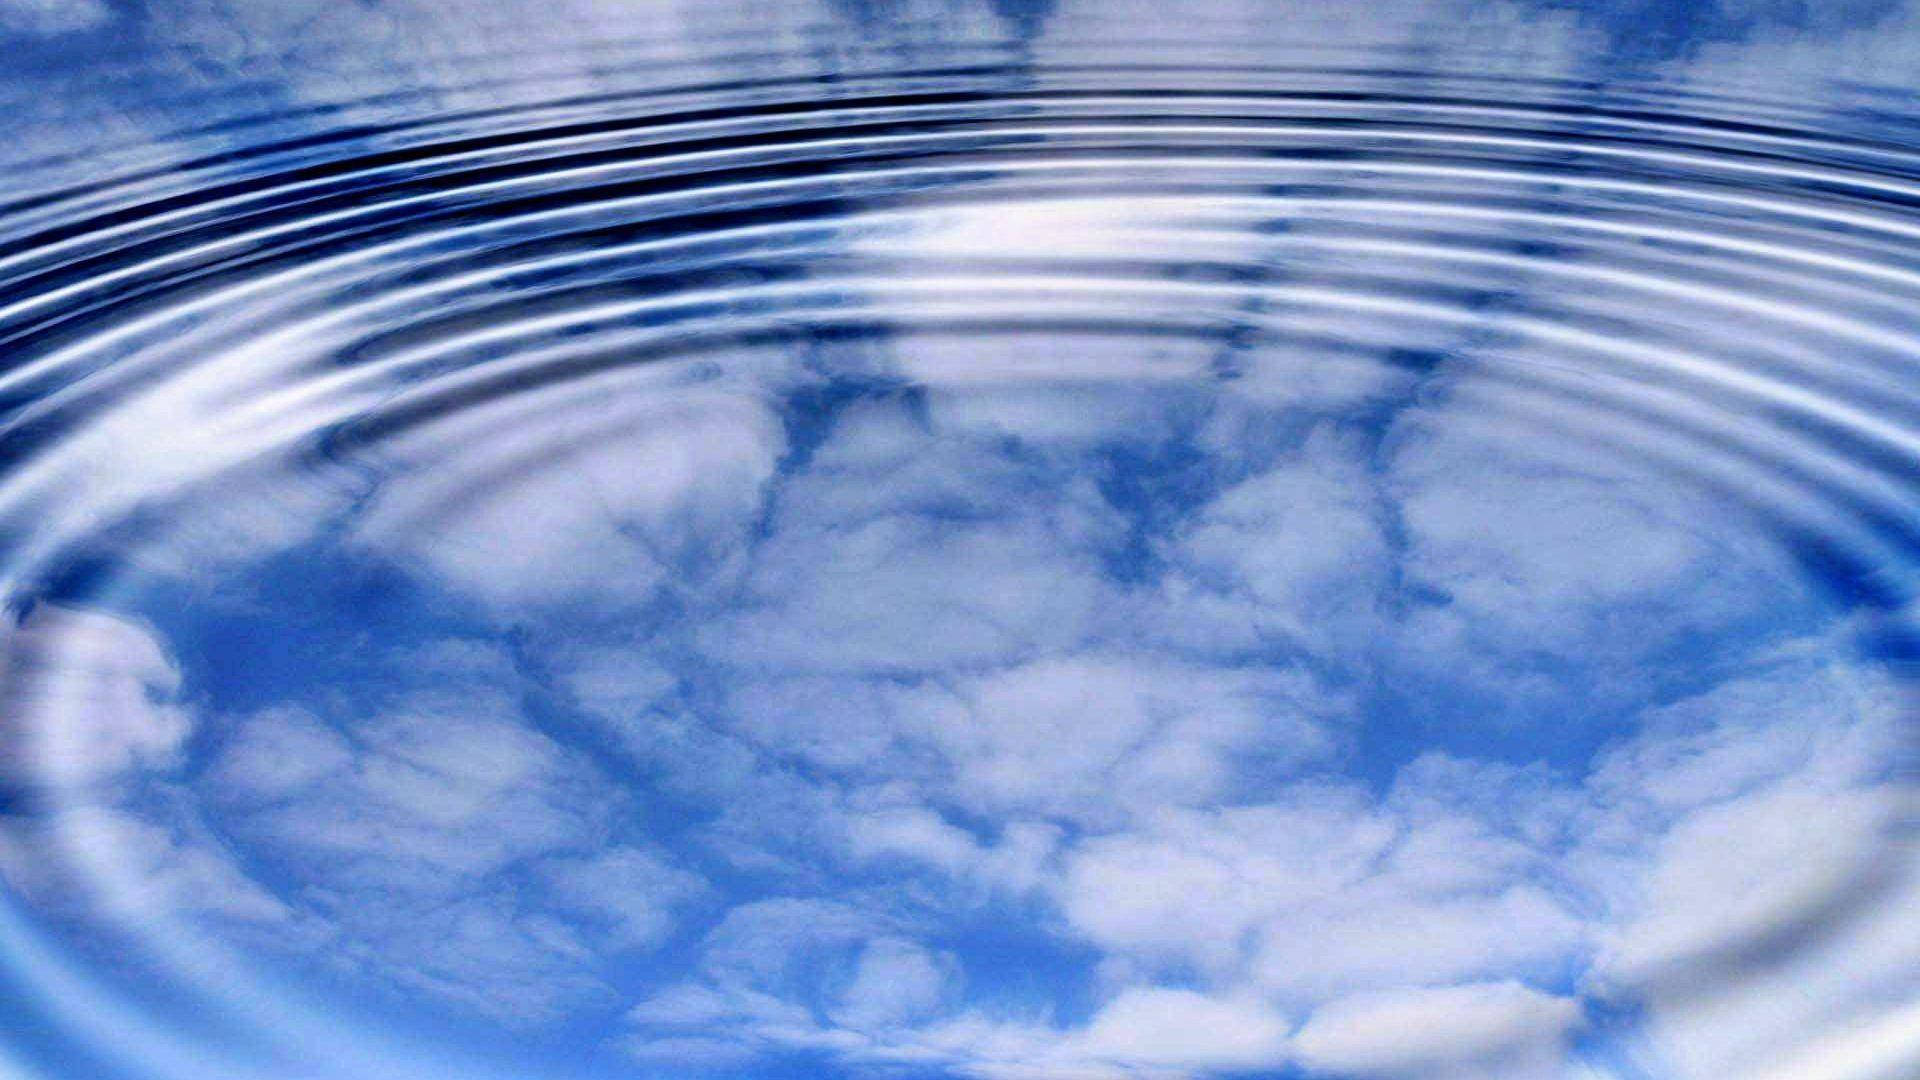 Cloud Reflection On Rippling Water Wallpaper